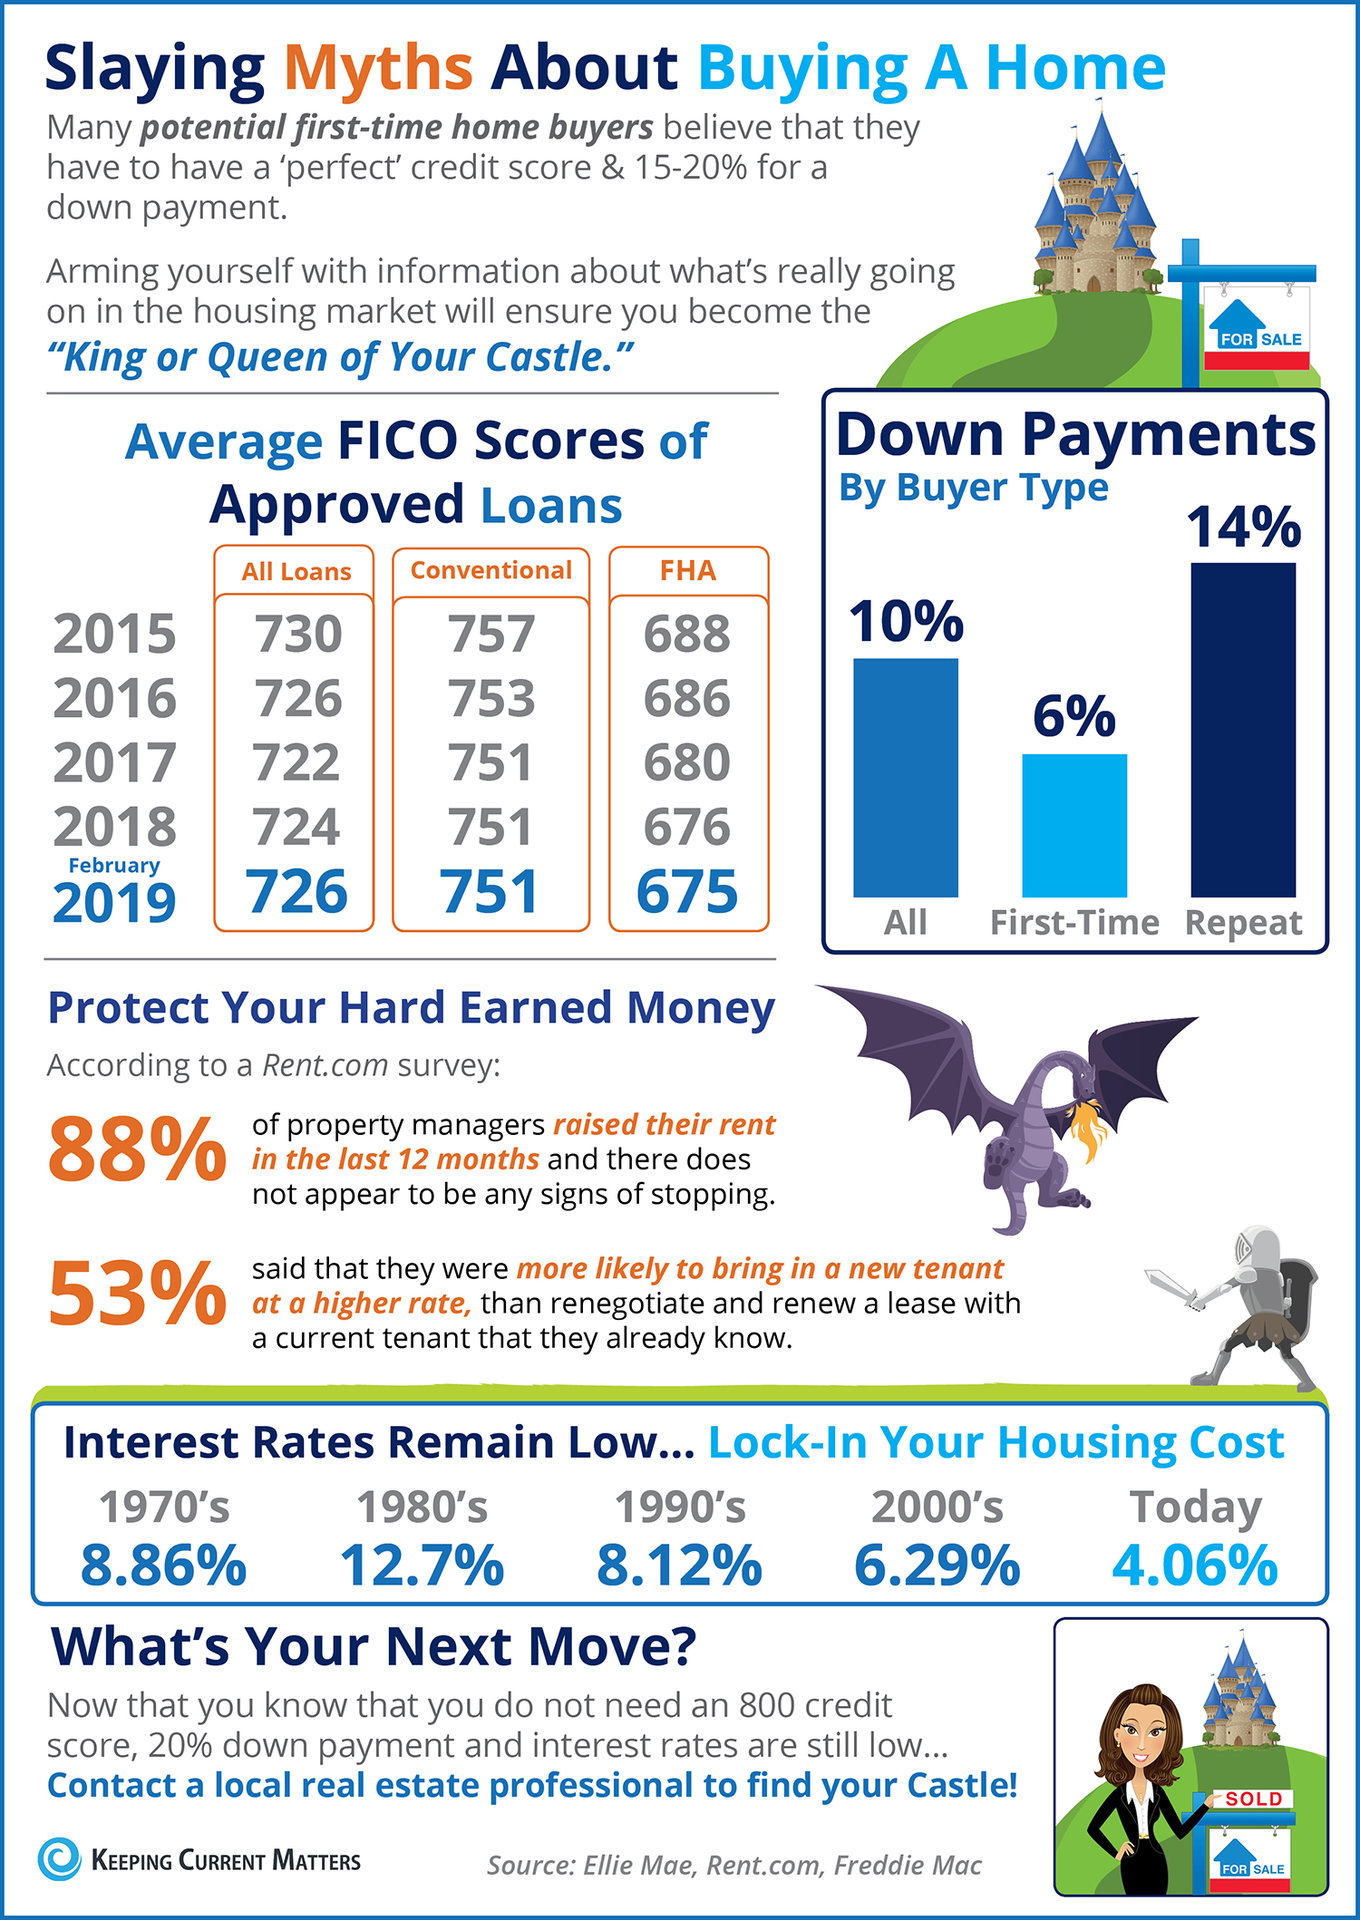 Slaying the Largest Homebuying Myths Today [INFOGRAPHIC] | Keeping Current Matters